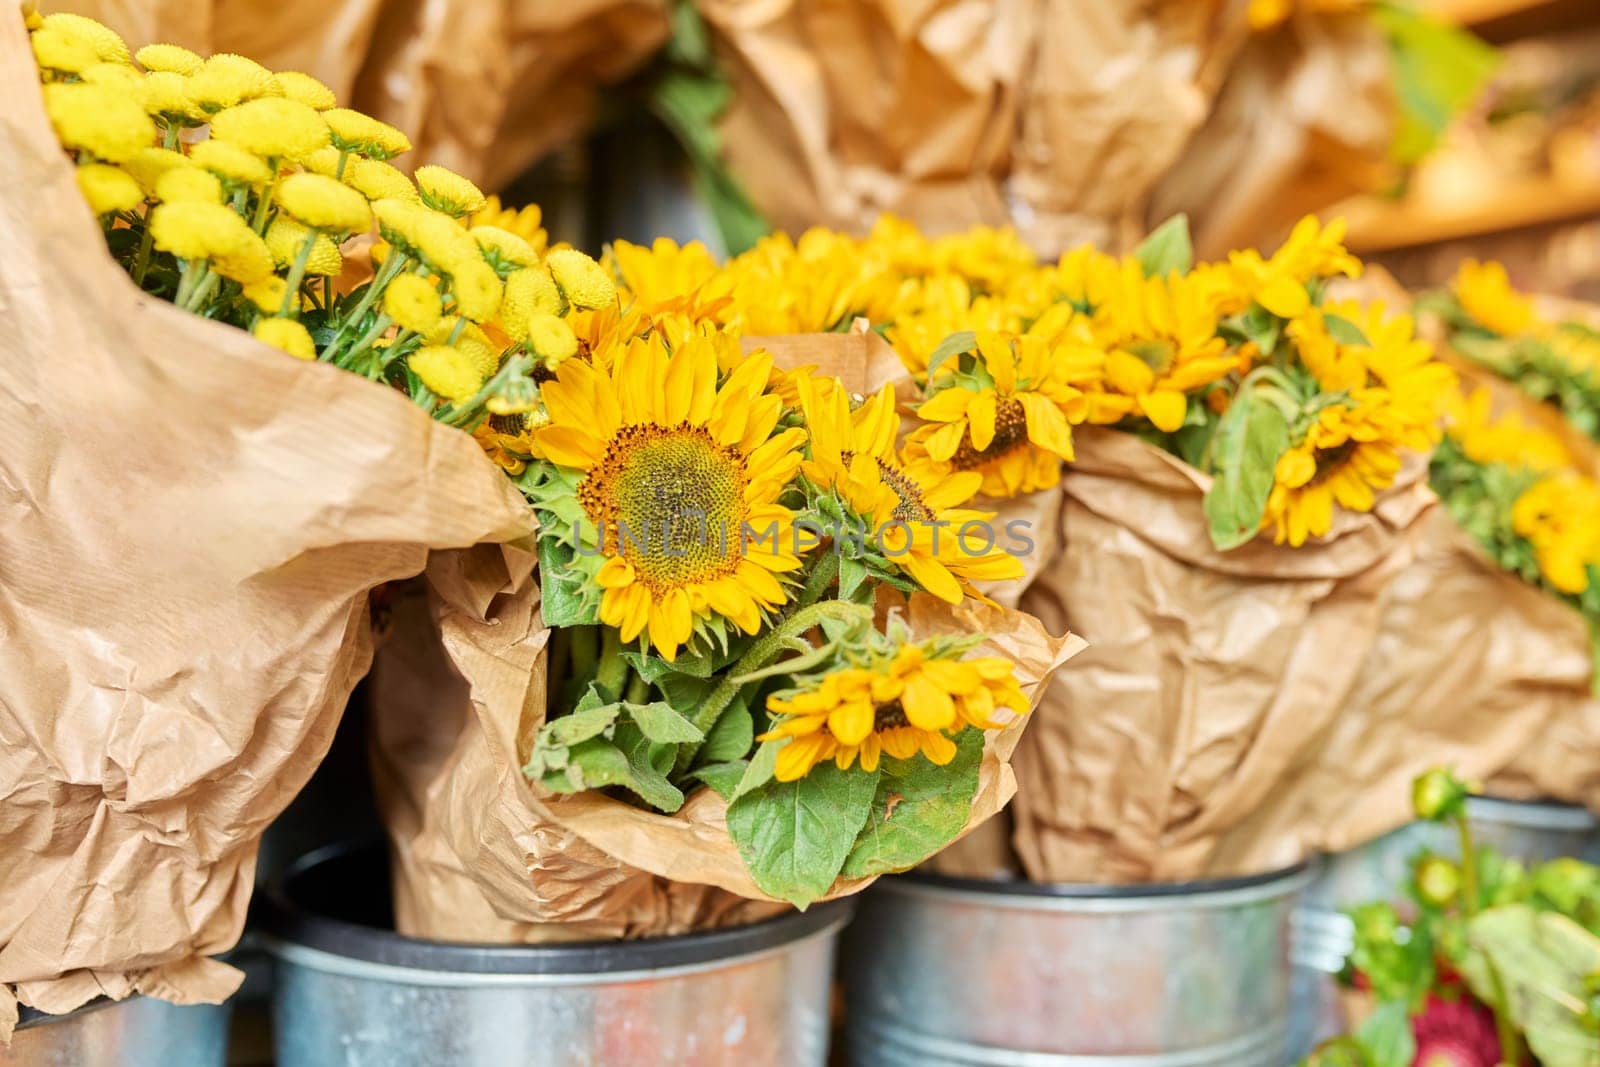 Flower shop, close-up of fresh flowers in buckets, yellow decorative sunflowers by VH-studio